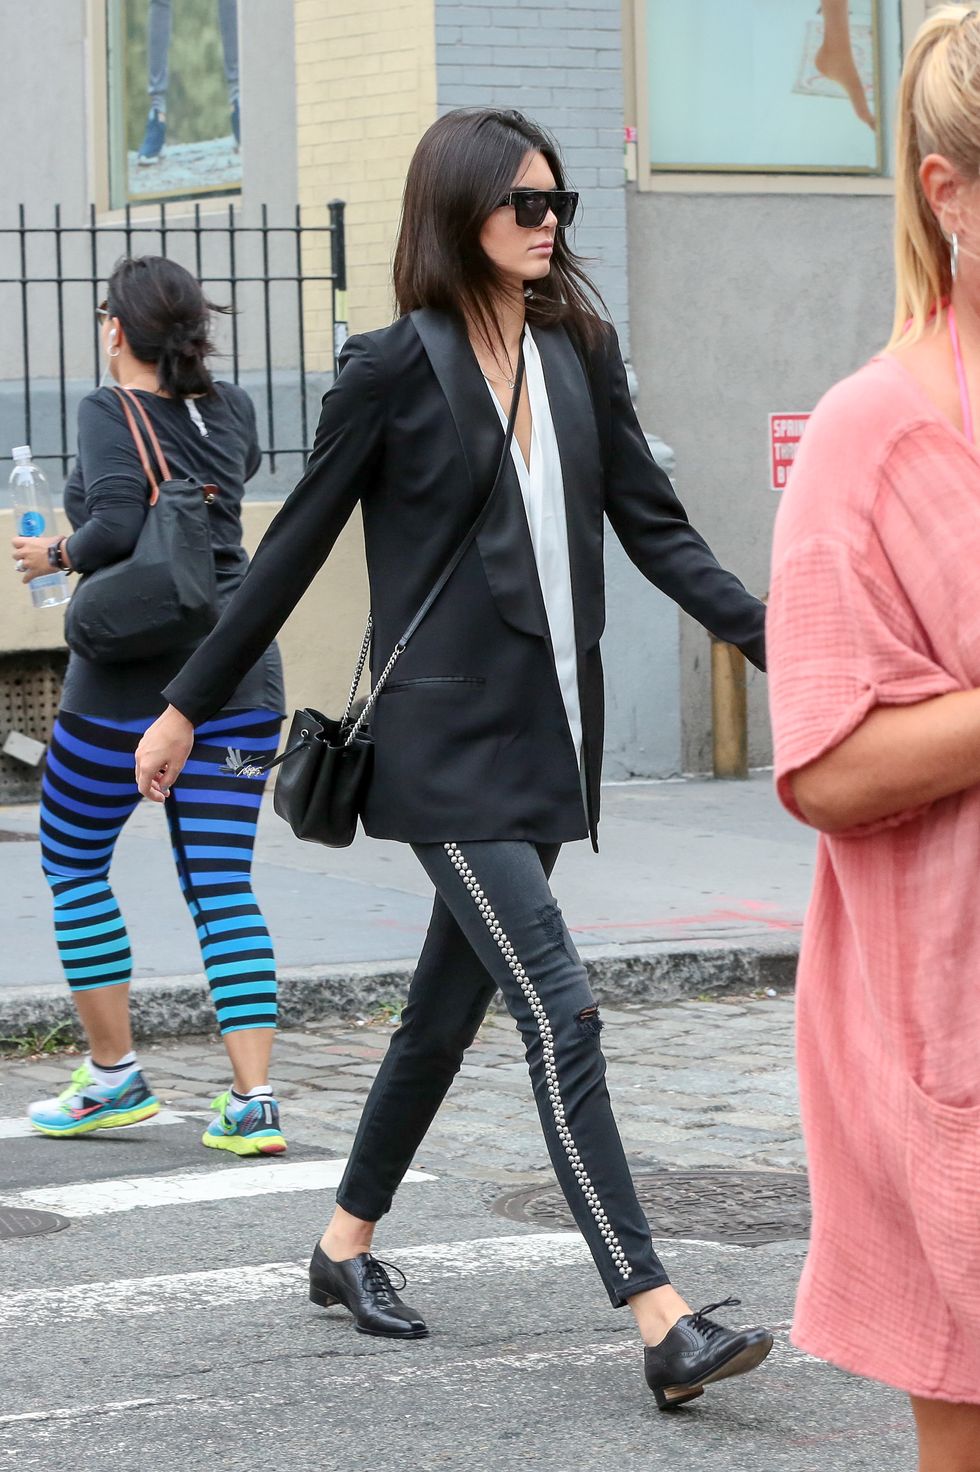 Kendall Jenner out and about in a black tuxedo